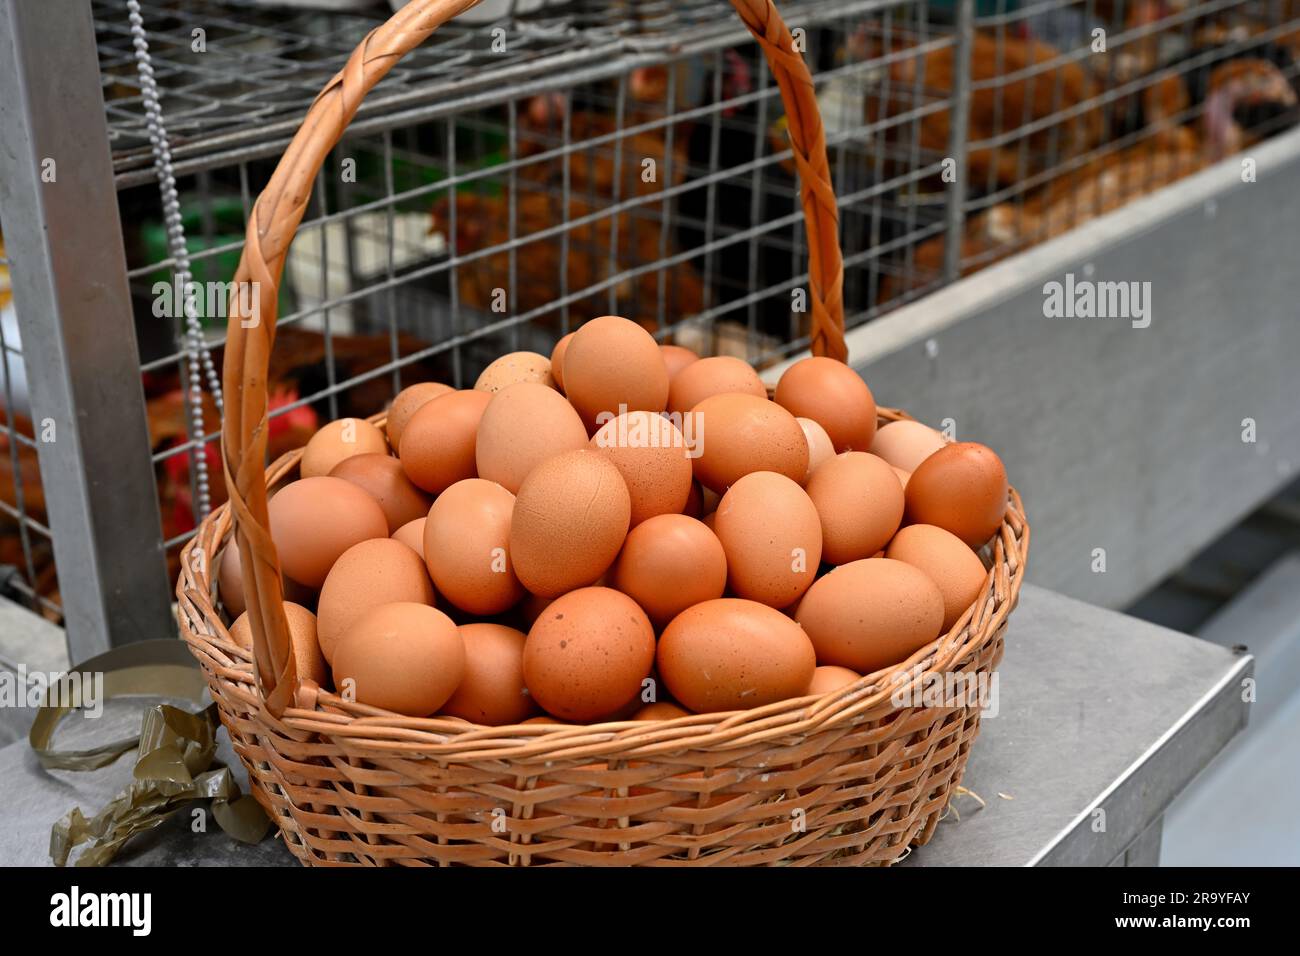 Basket full of fresh eggs with live chickens for sale in cages behind at market Stock Photo